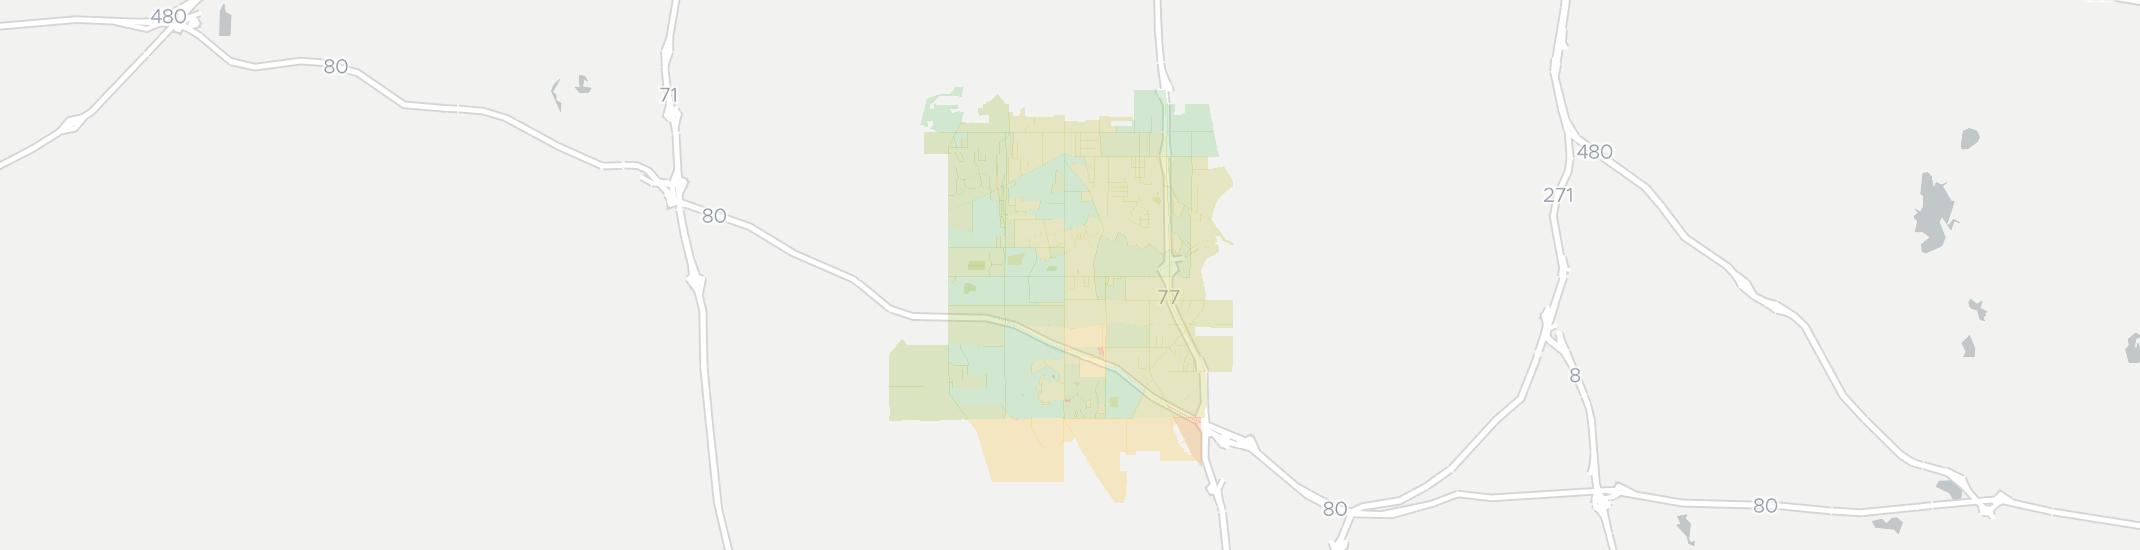 Broadview Heights Zoning Map